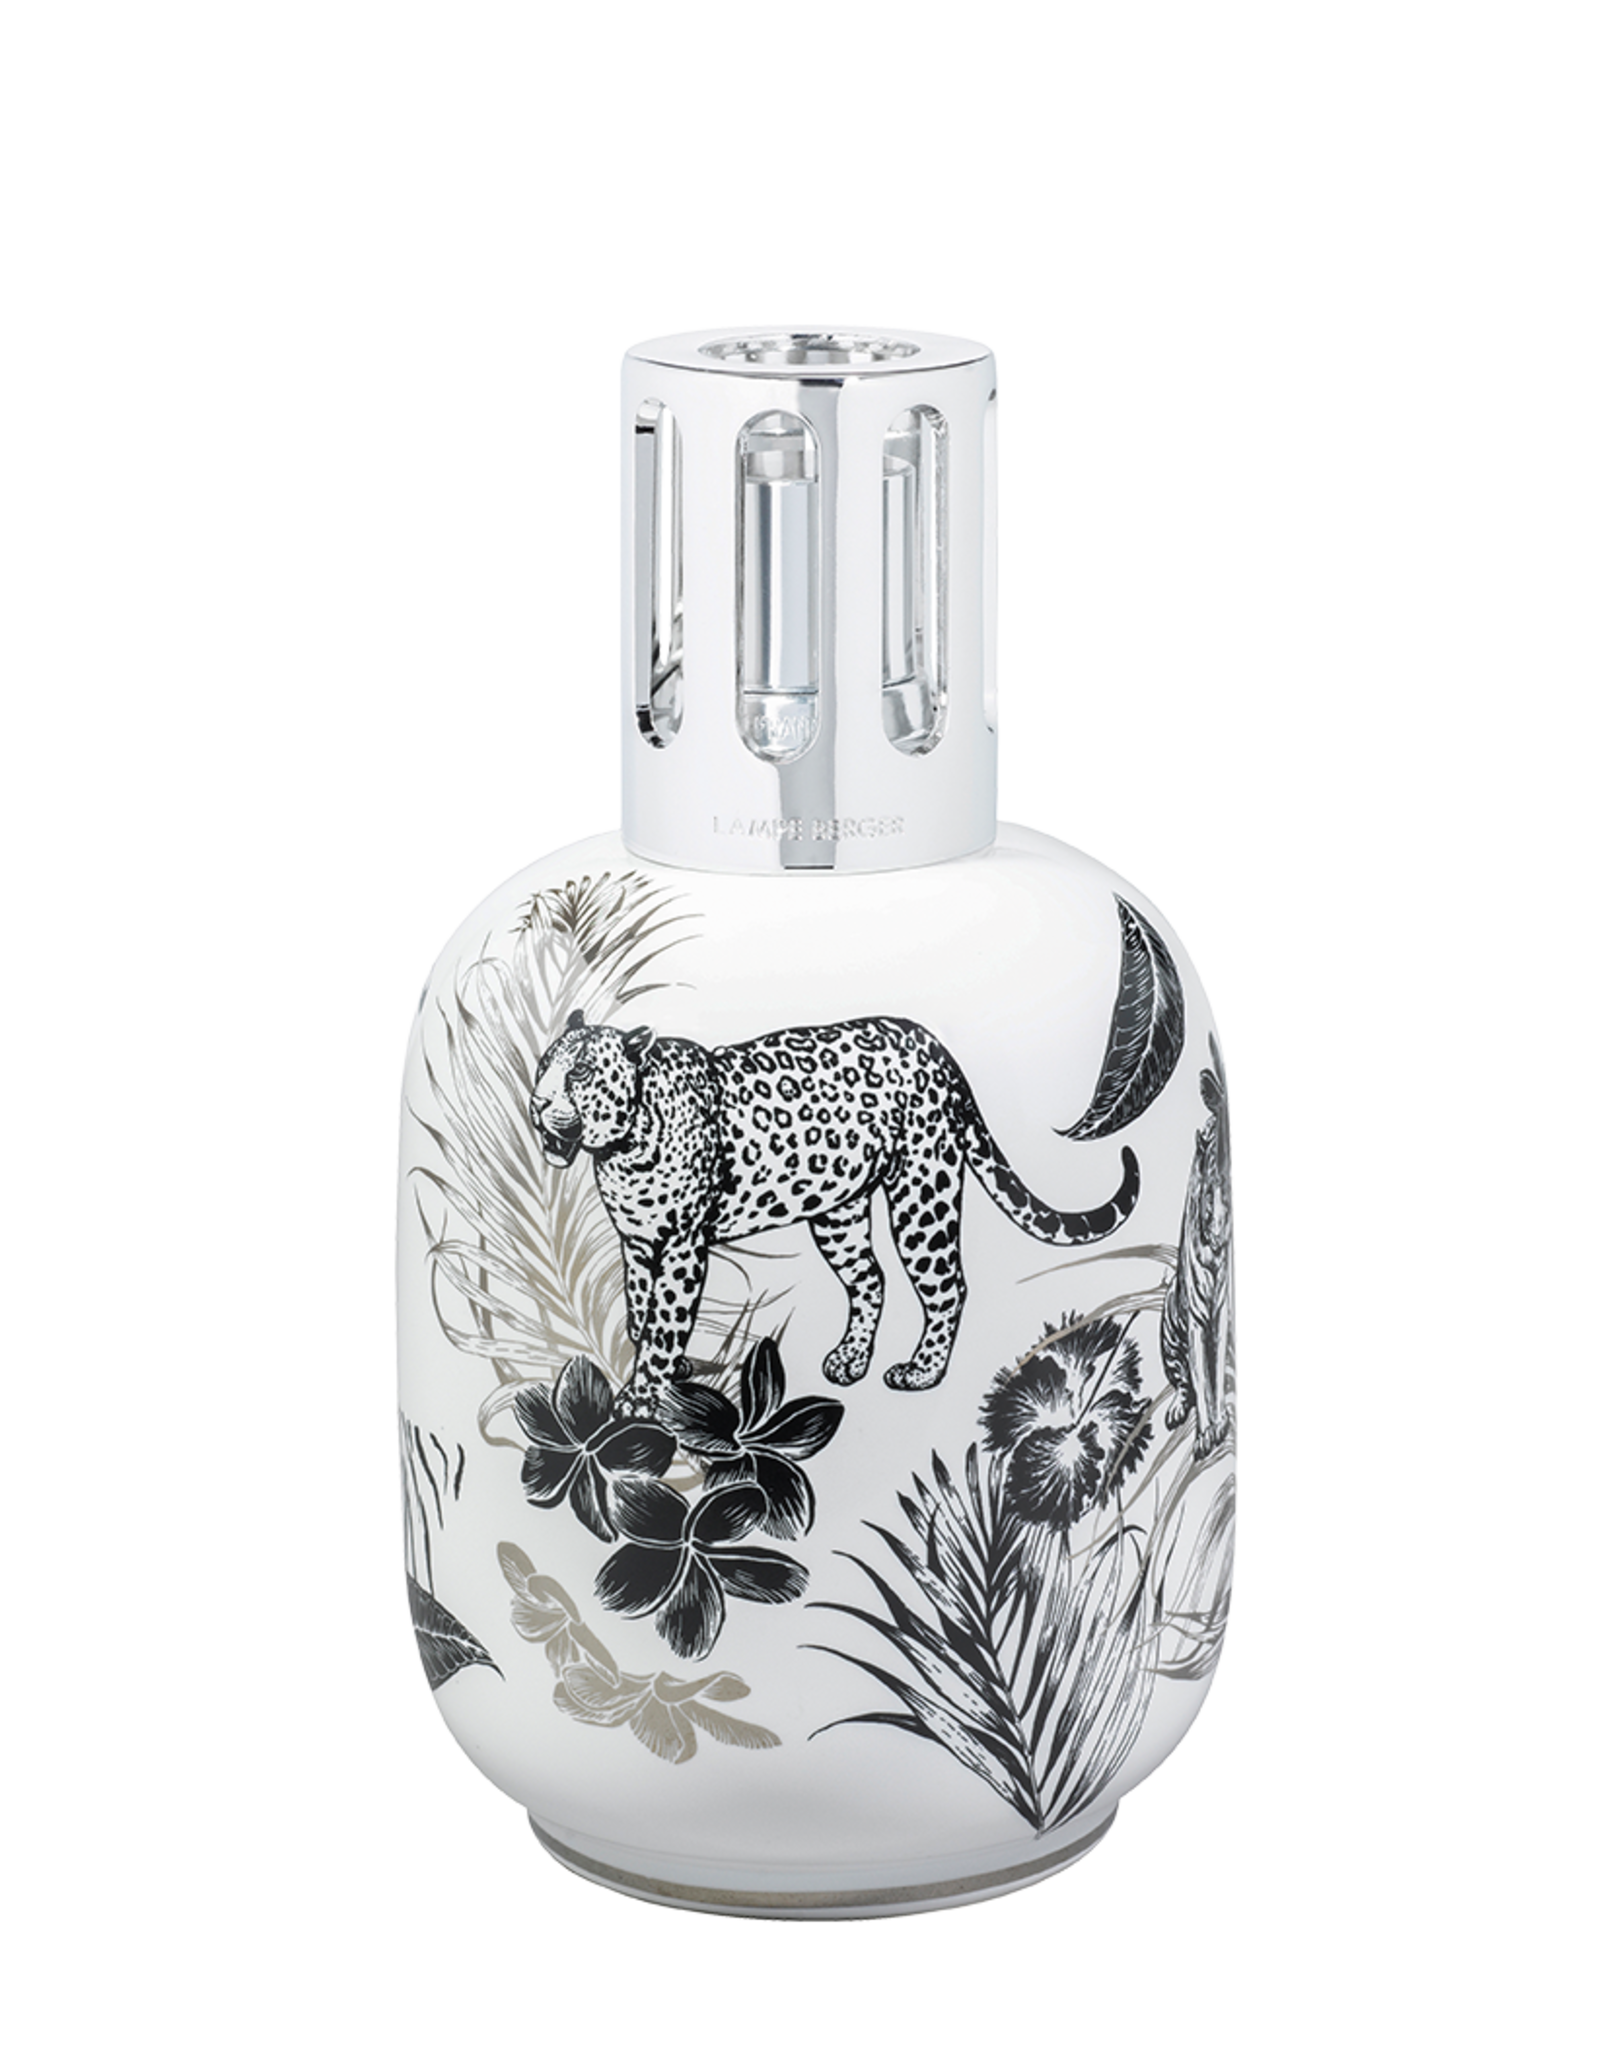 Lampe Berger Jungle Home Fragrance Lamp in White | Maison Berger